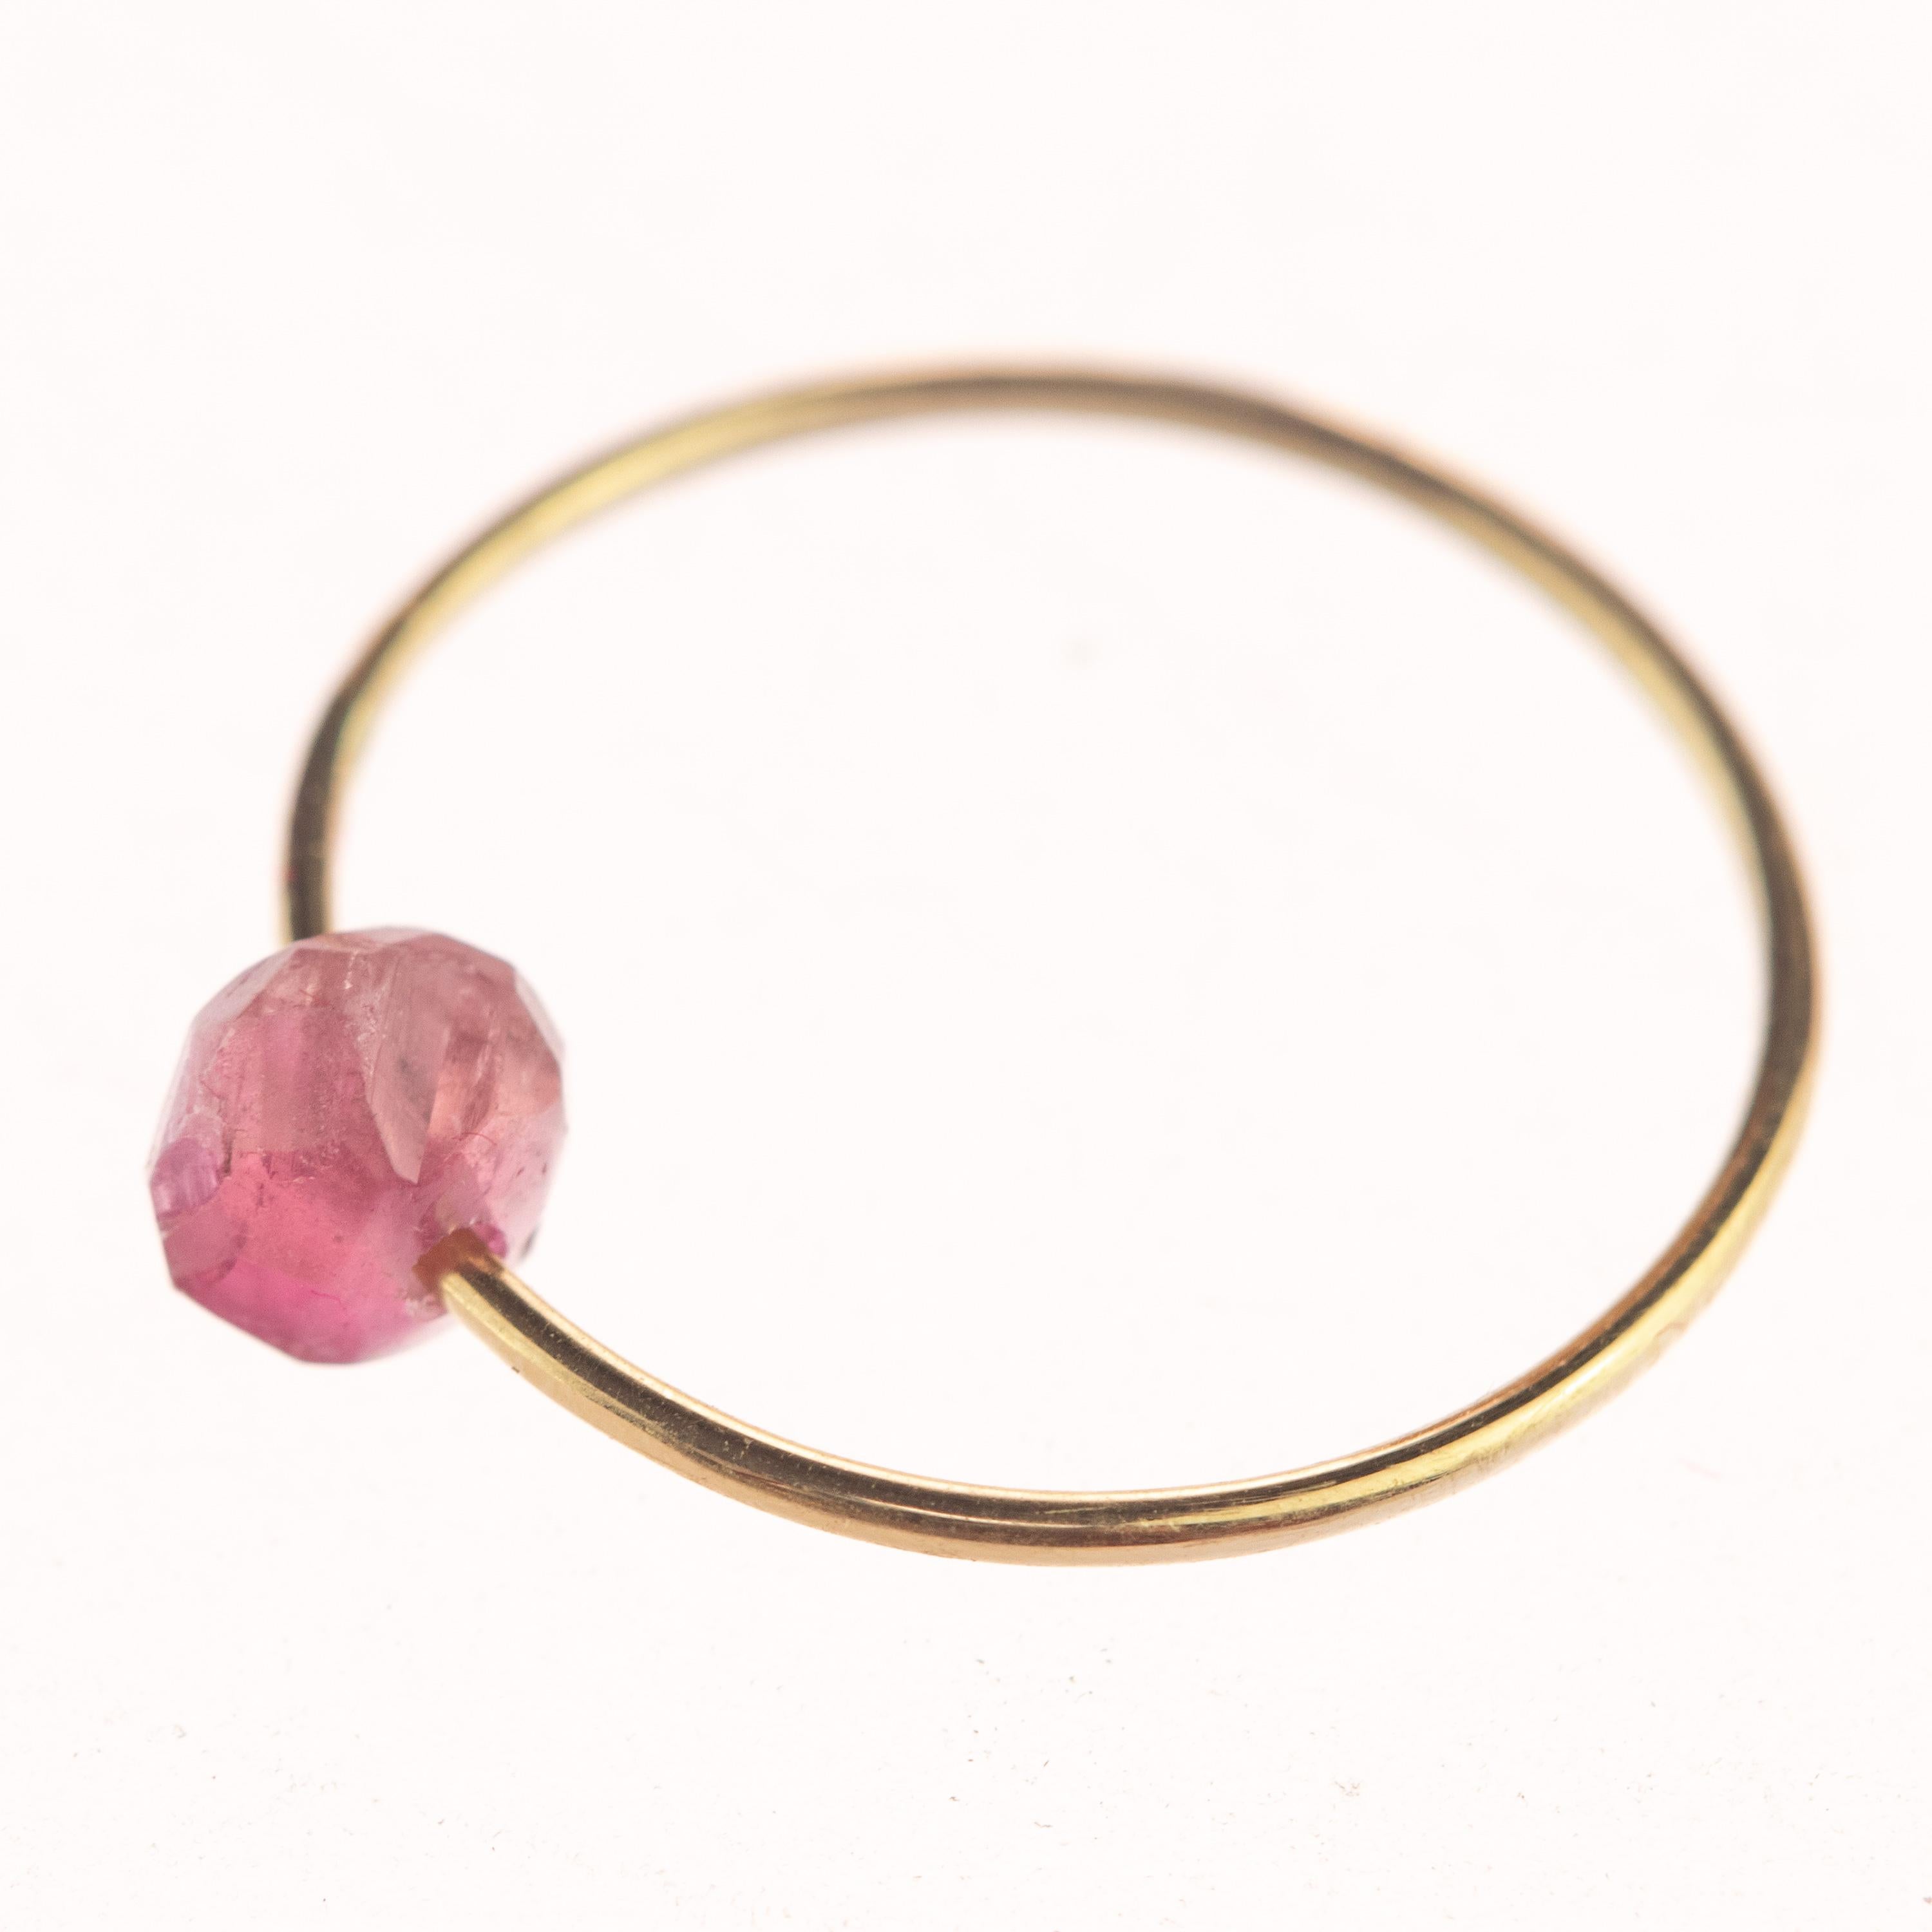 Signature INTINI Jewels Venus Planet ring. Contemporary ring design in 18 karat yellow gold with a precious Tourmaline Violet rondelle.  Passion and intensity mixed in one jewel. Delight yourself with a strong, minimalist design, just for a stunning